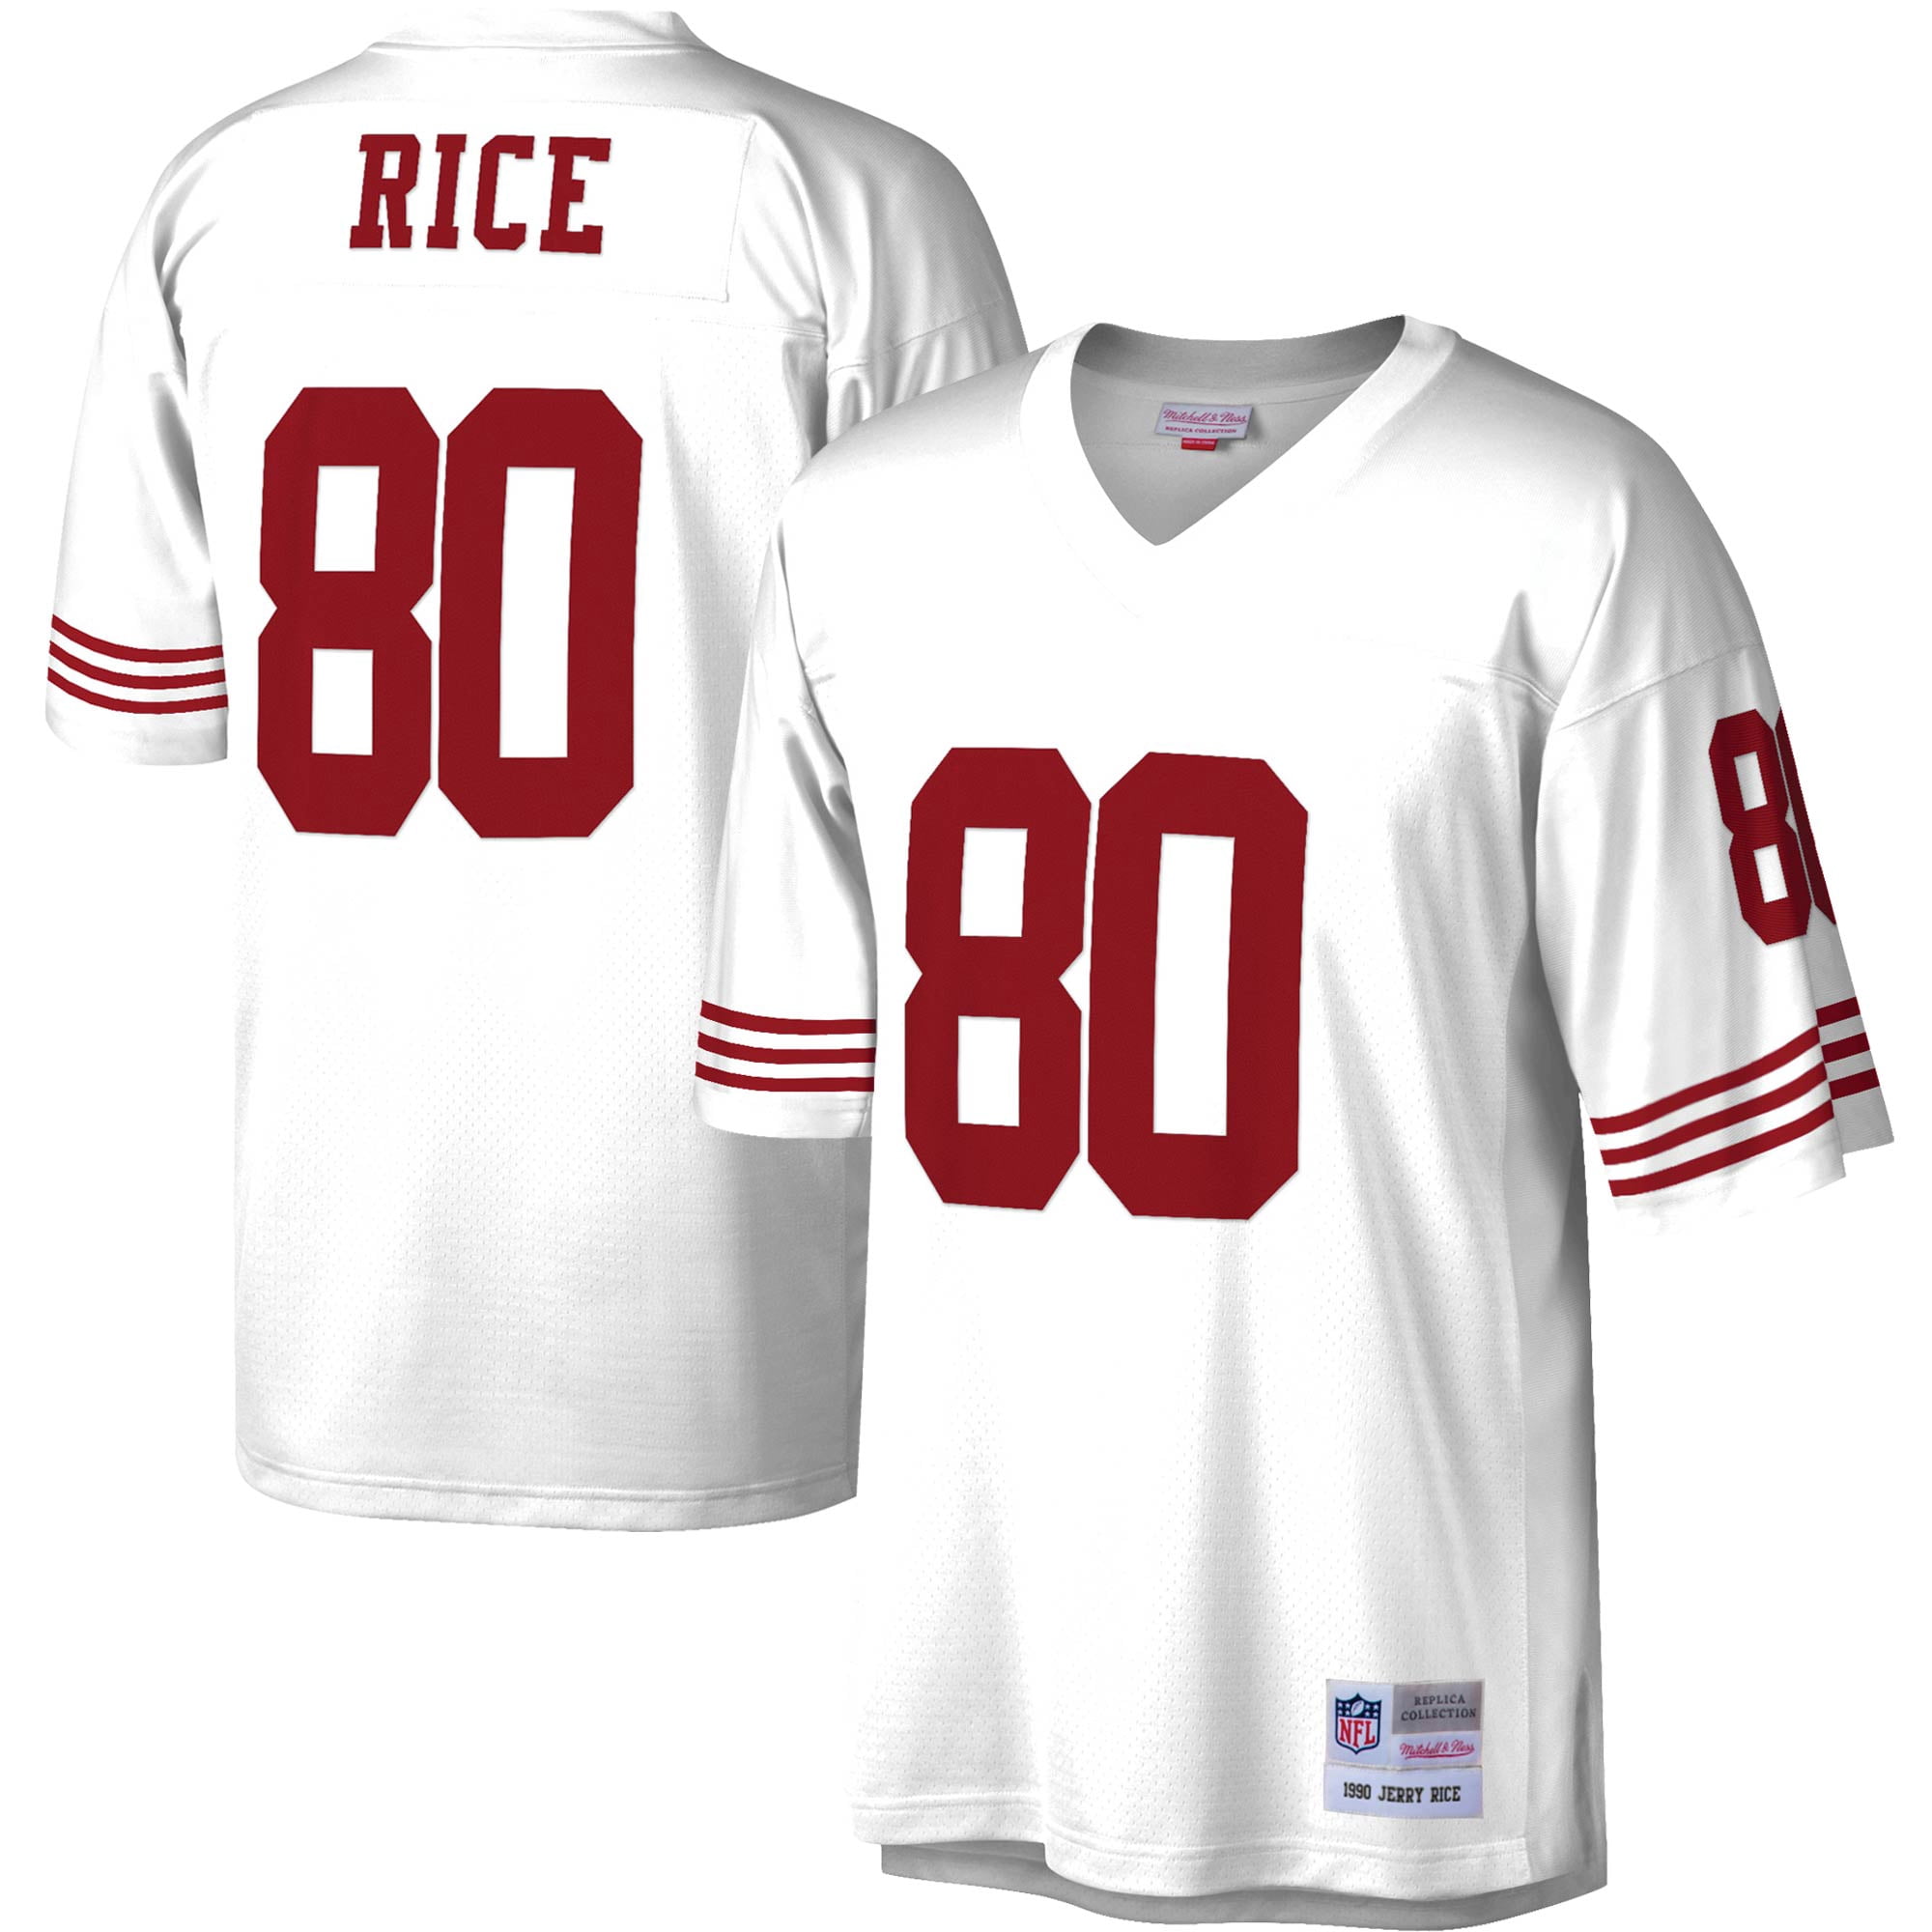 Jerry Rice San Francisco 49ers Autographed White Throwback Mitchell & Ness  Authentic Jersey